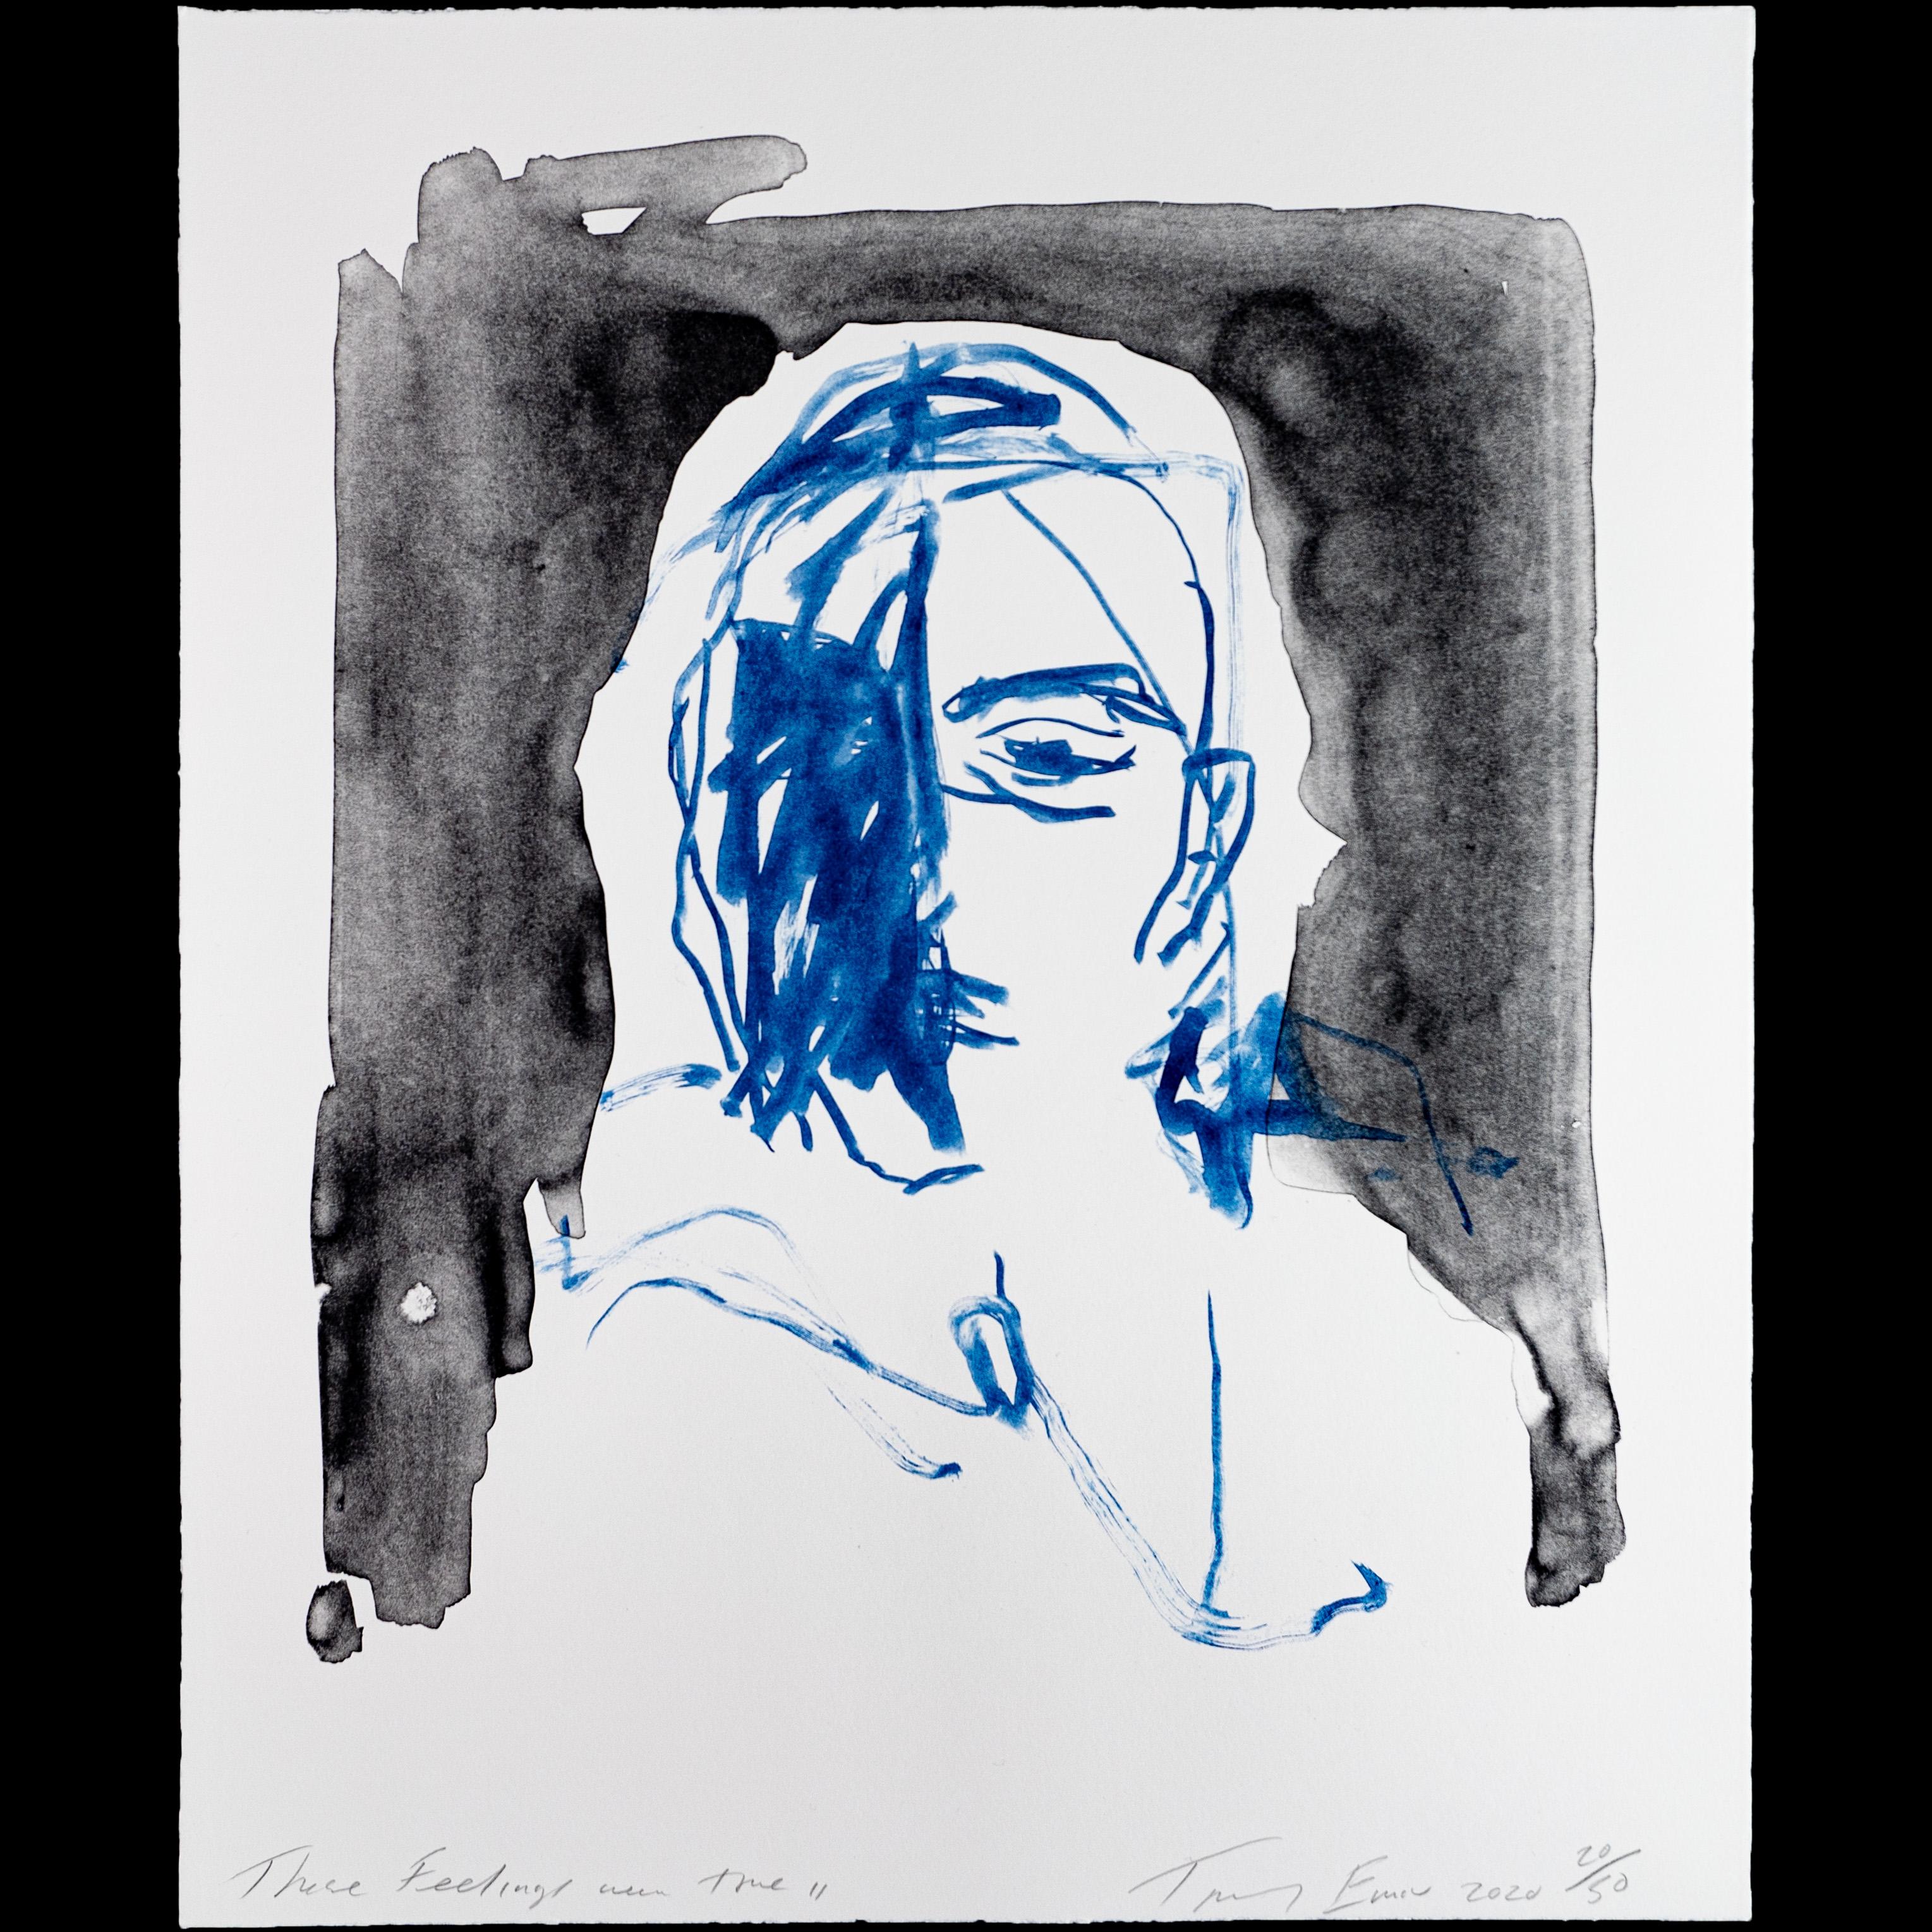 These Feelings Were True II - Emin, Contemporary, YBAs, Lithographie, Porträt